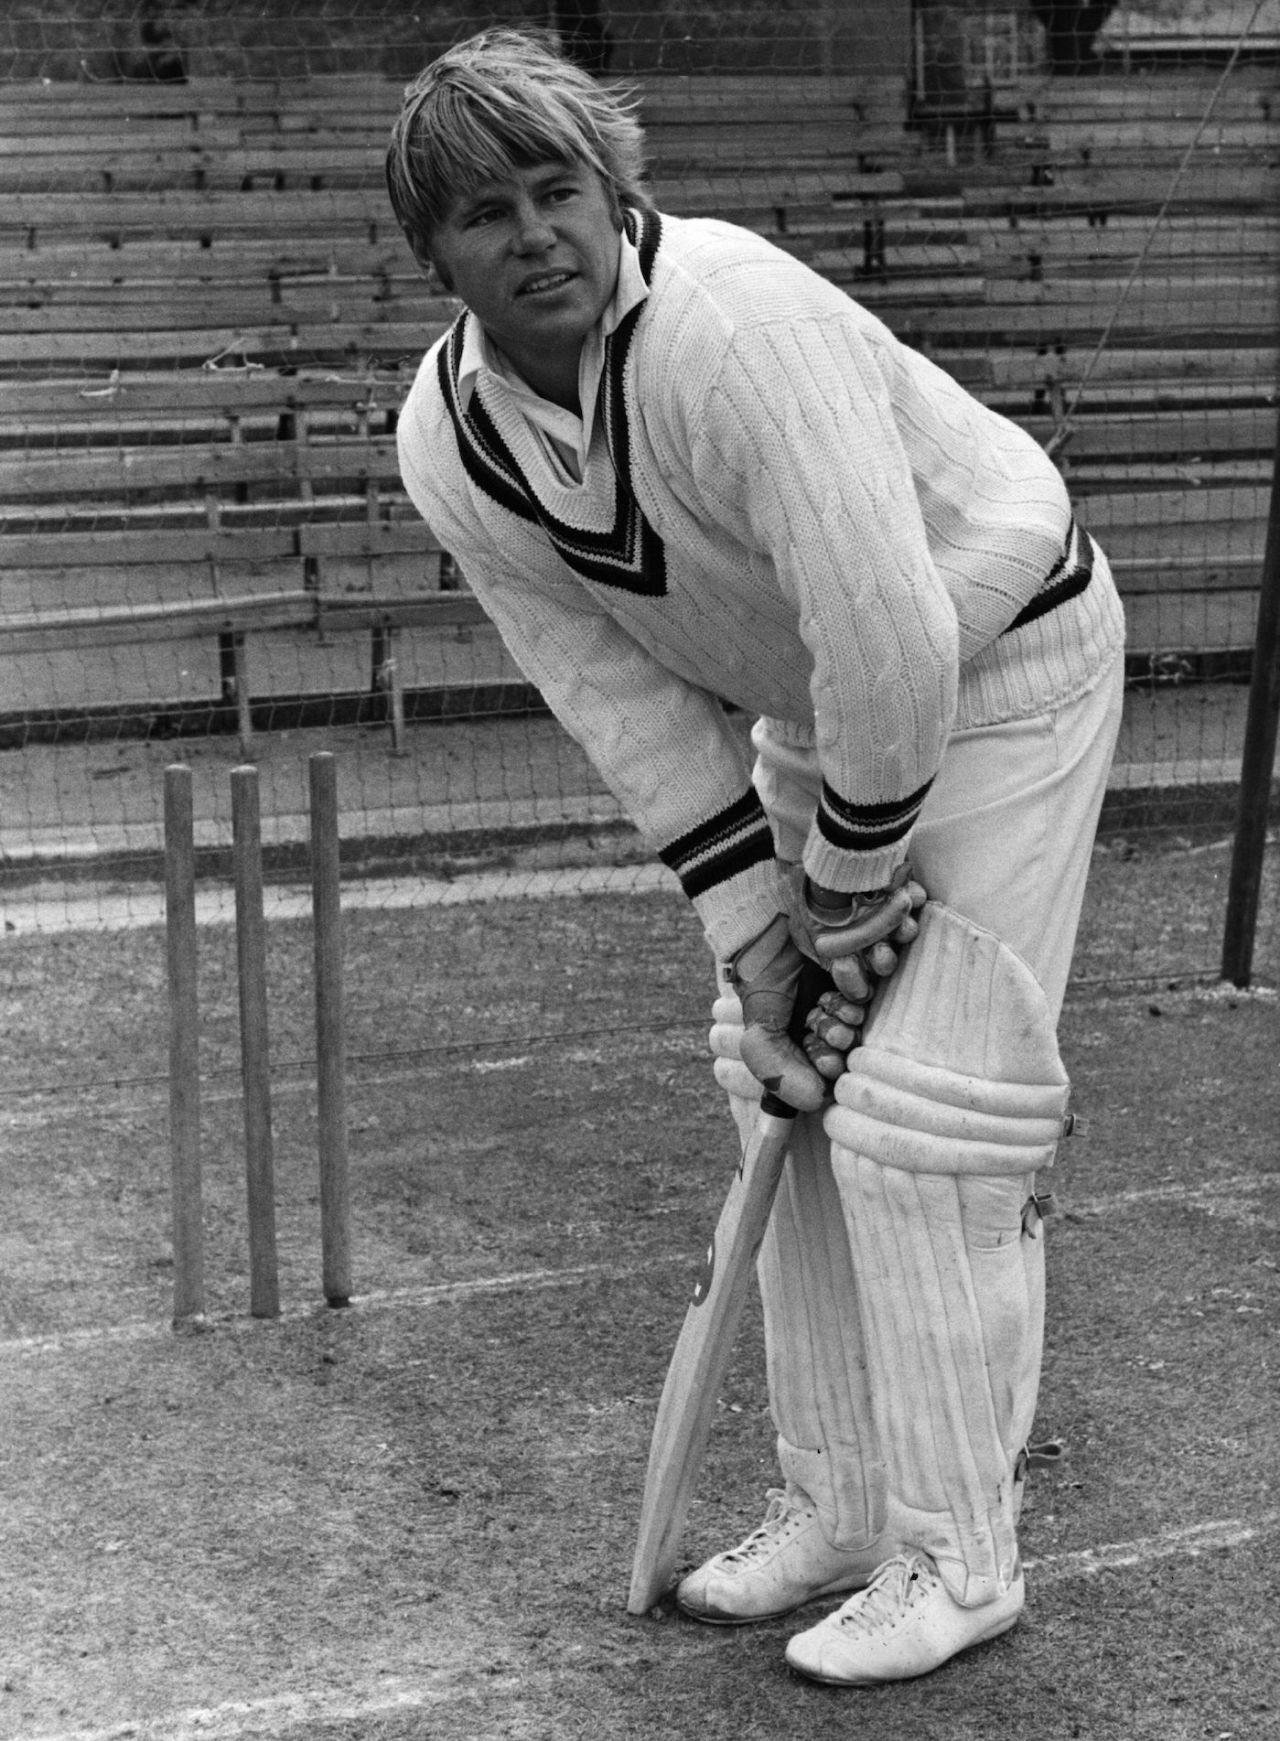 Mike Procter bats in the nets, January 1, 1980